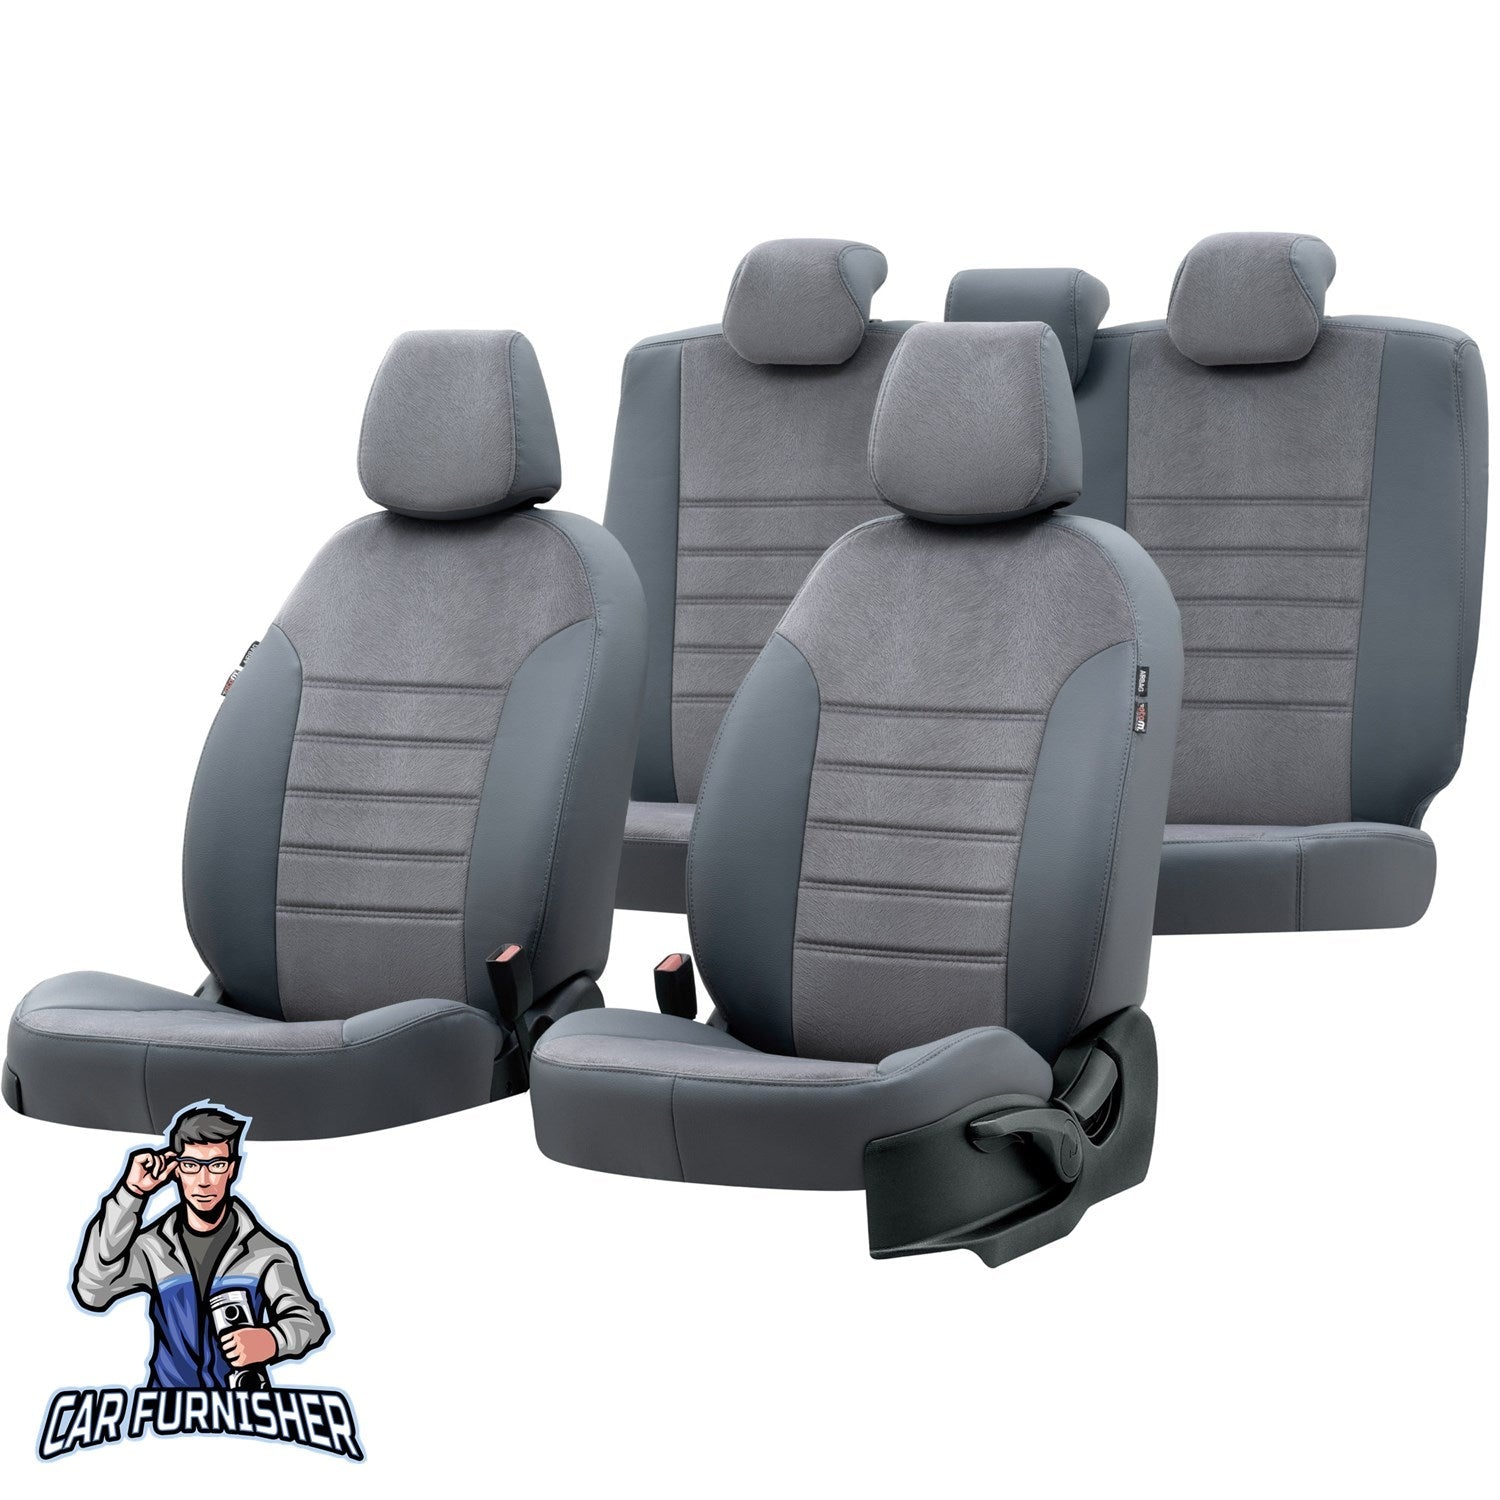 Volvo XC40 Car Seat Cover 2018-2023 T3/T4/T5 London Design Smoked Full Set (5 Seats + Handrest) Leather & Fabric